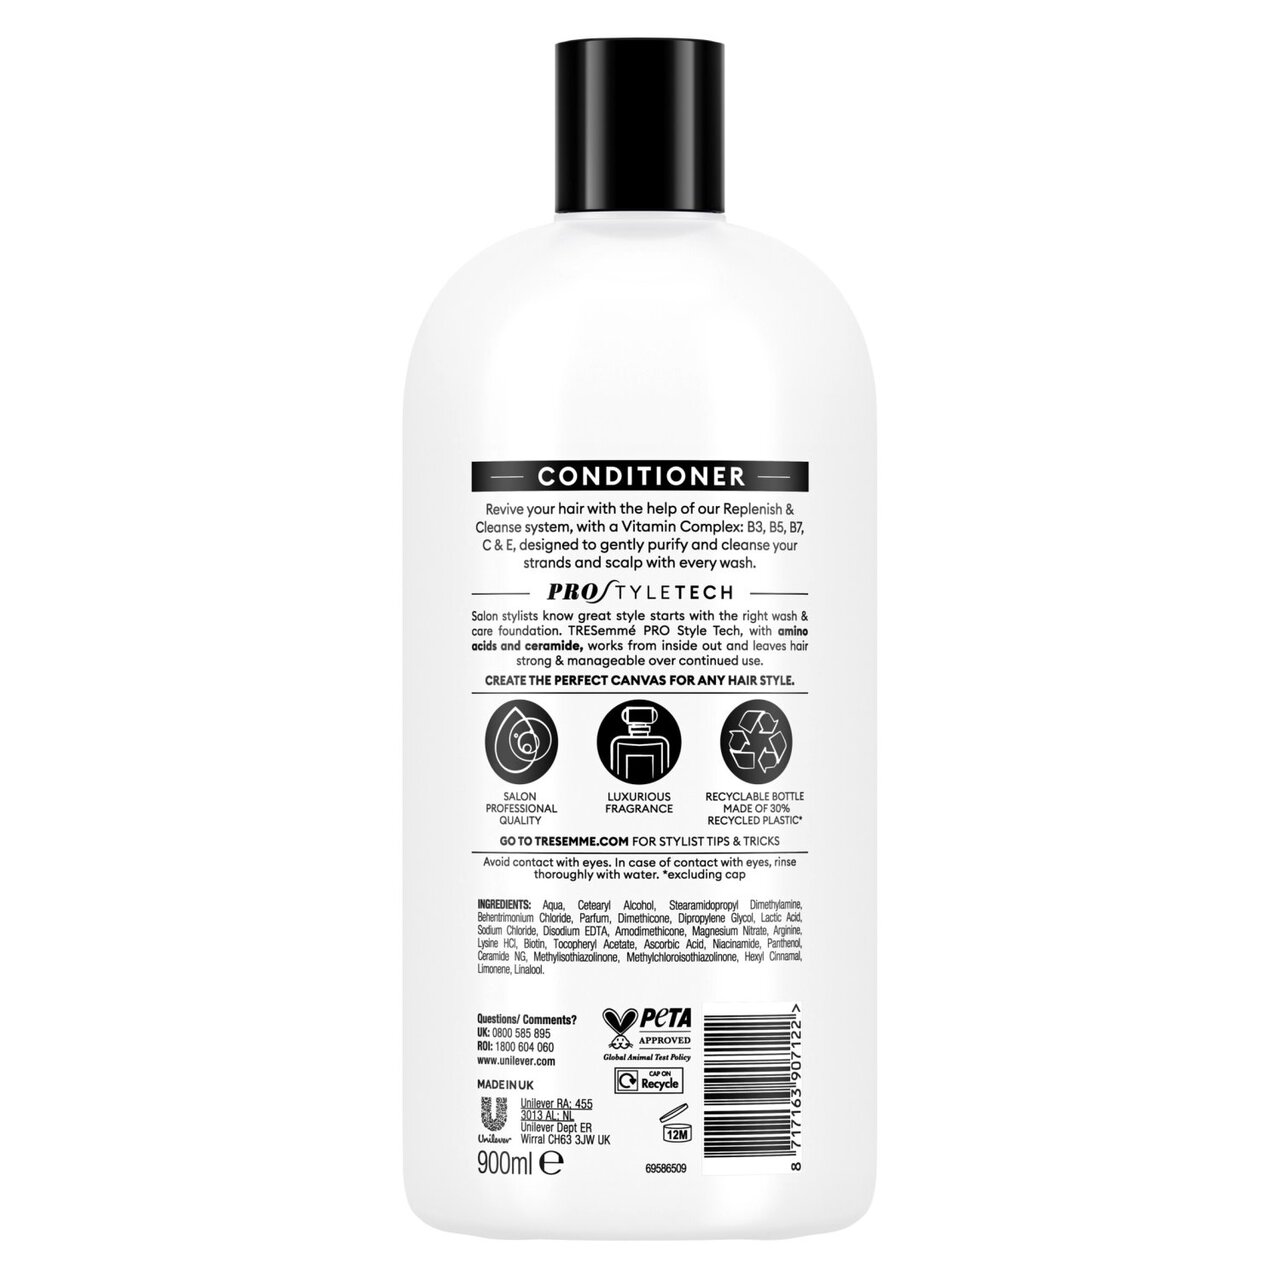 Tresemme Replenish & Cleanse Conditioner 900ml